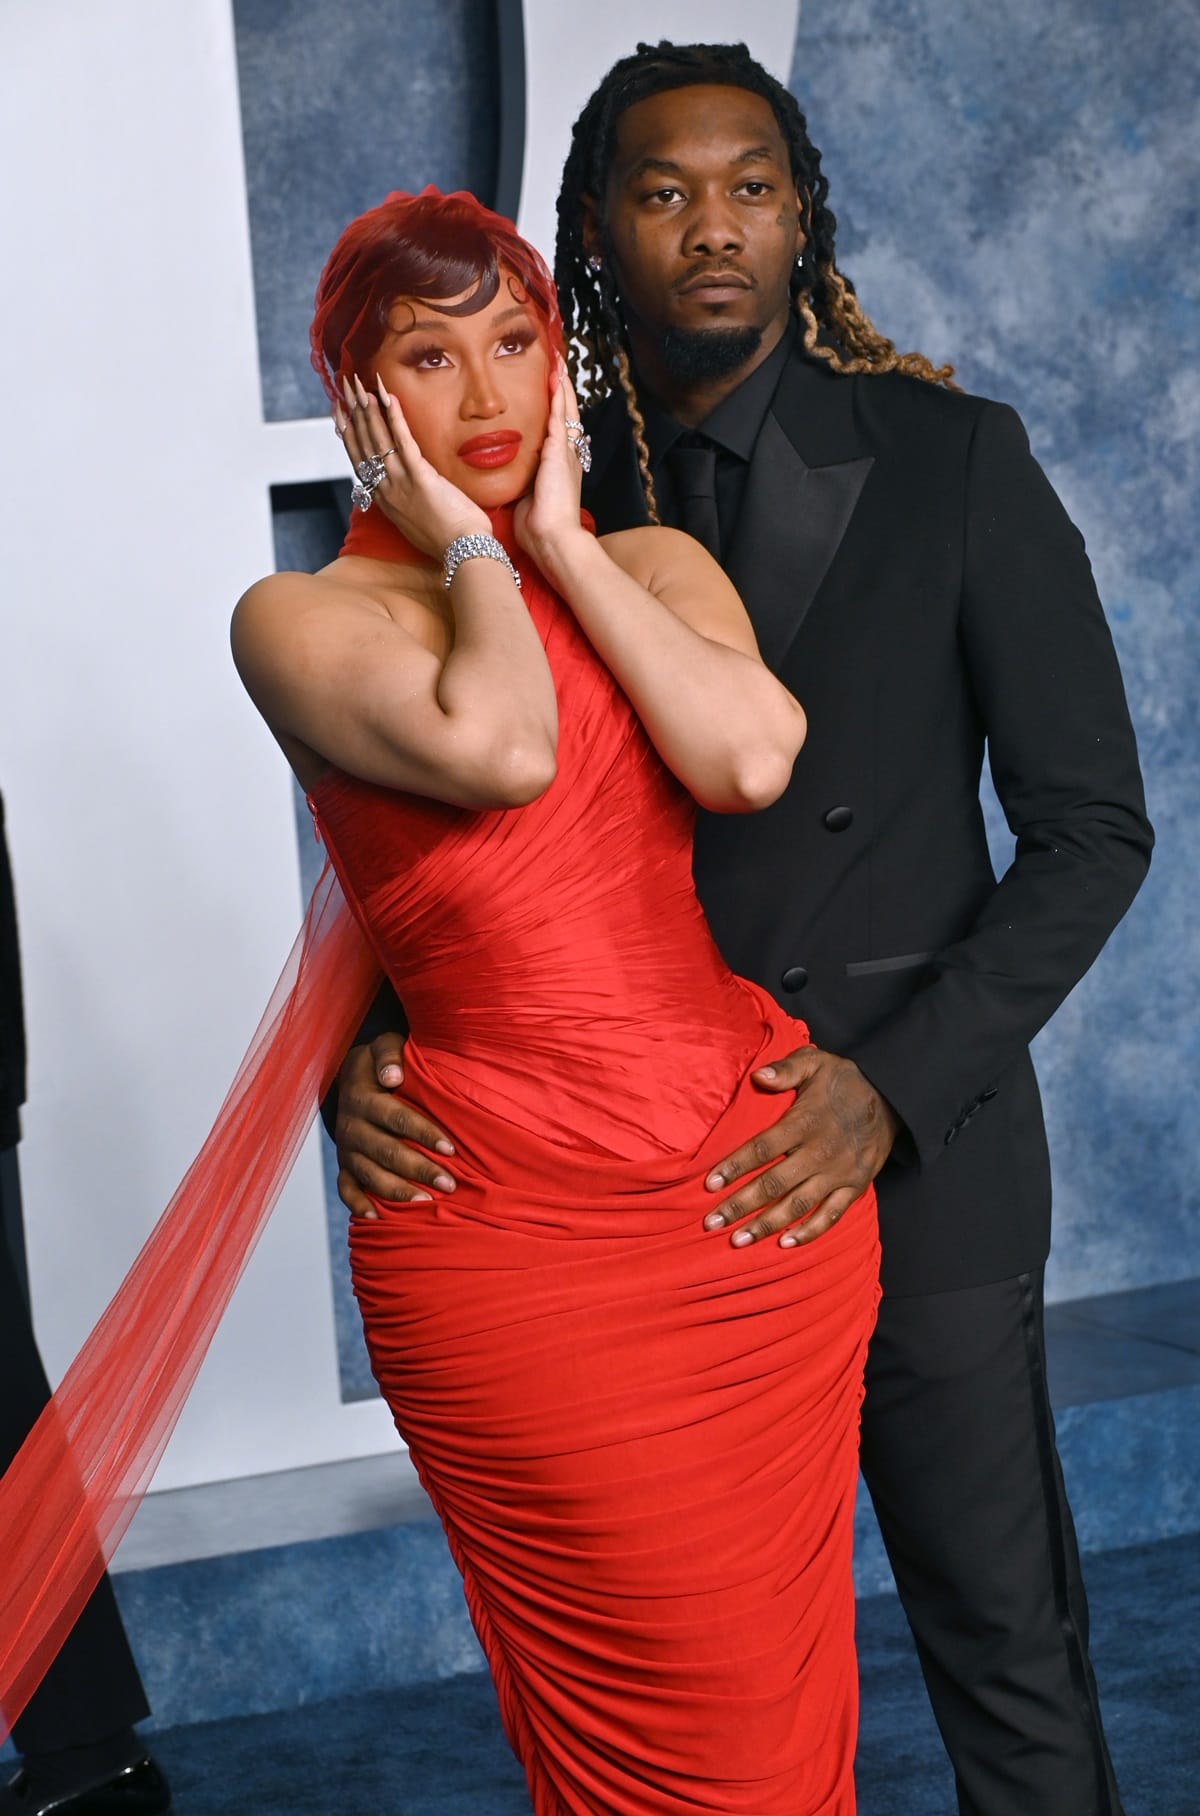 Offset, the American rapper, stands notably taller than Cardi B, with a height of 5 feet 8 ½ inches (174 cm) compared to Cardi B's height of 5 feet 1 inch (154.9 cm), reflecting a height difference of around 7 ½ inches